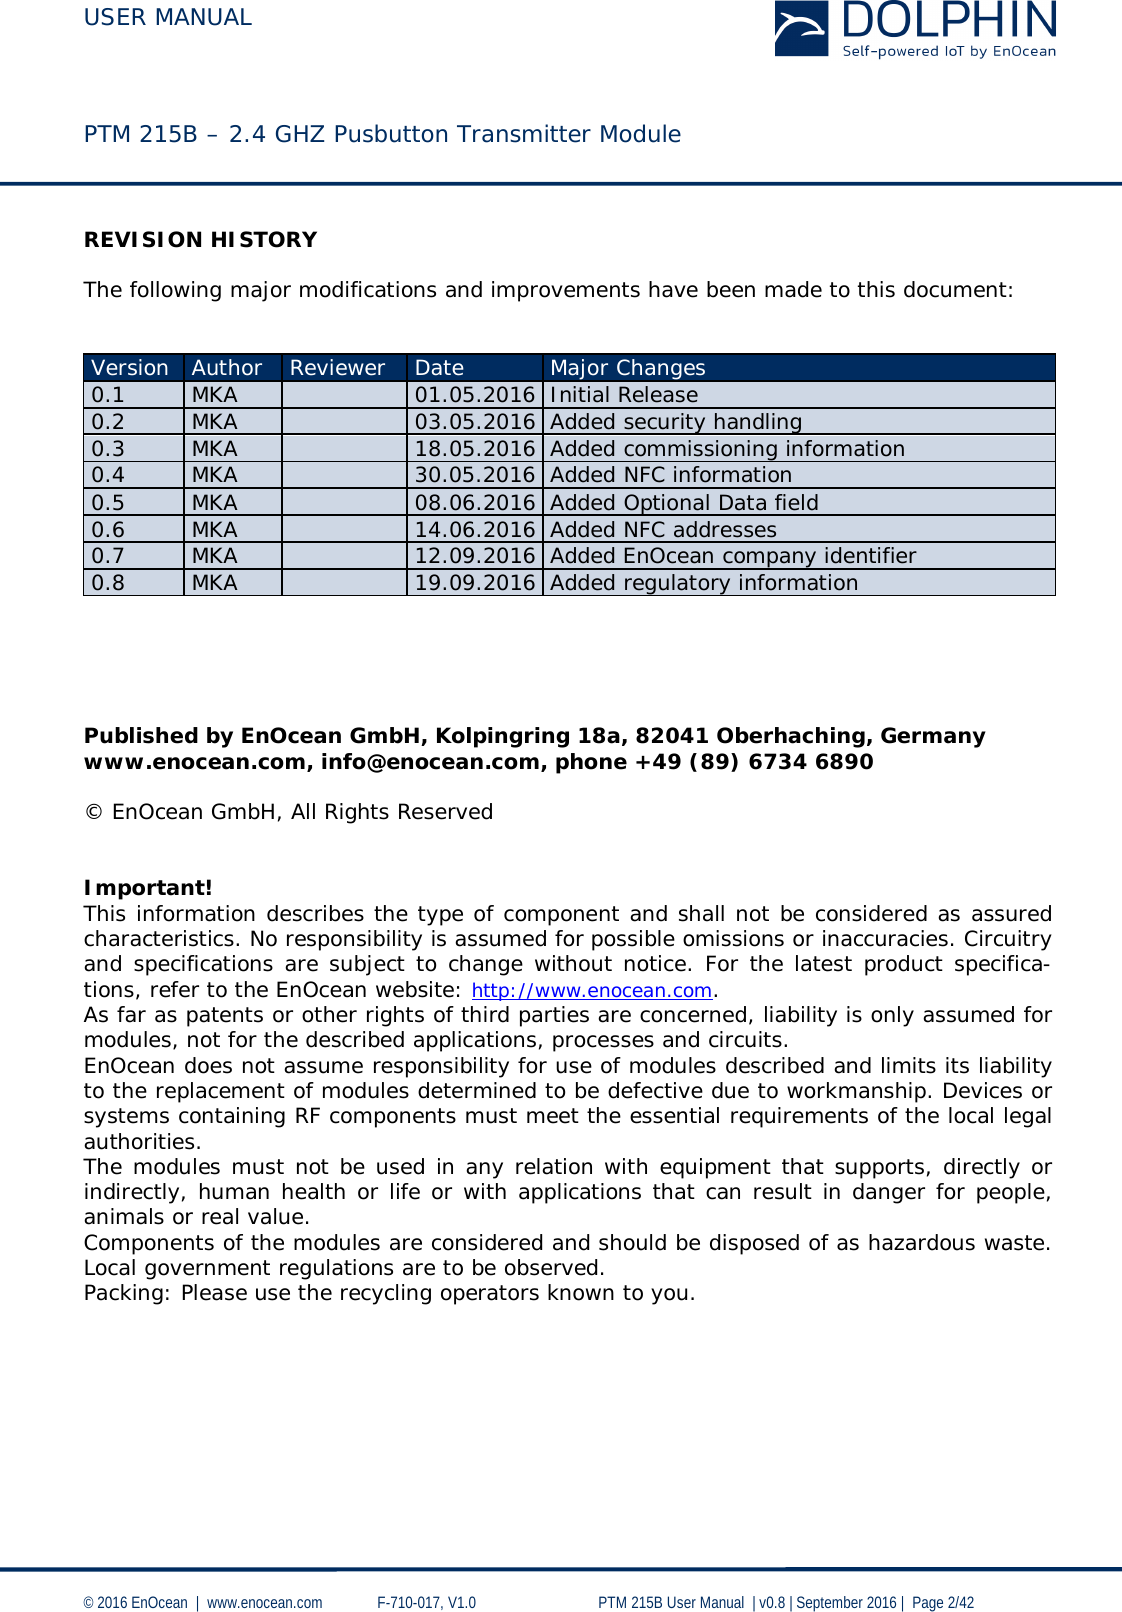  USER MANUAL    PTM 215B – 2.4 GHZ Pusbutton Transmitter Module  © 2016 EnOcean  |  www.enocean.com   F-710-017, V1.0        PTM 215B User Manual  | v0.8 | September 2016 |  Page 2/42  REVISION HISTORY  The following major modifications and improvements have been made to this document:   Version Author Reviewer Date Major Changes 0.1 MKA  01.05.2016 Initial Release 0.2 MKA  03.05.2016 Added security handling 0.3 MKA  18.05.2016 Added commissioning information 0.4 MKA  30.05.2016 Added NFC information 0.5 MKA  08.06.2016 Added Optional Data field 0.6 MKA  14.06.2016 Added NFC addresses 0.7 MKA  12.09.2016 Added EnOcean company identifier 0.8 MKA  19.09.2016 Added regulatory information      Published by EnOcean GmbH, Kolpingring 18a, 82041 Oberhaching, Germany www.enocean.com, info@enocean.com, phone +49 (89) 6734 6890  © EnOcean GmbH, All Rights Reserved   Important! This information describes the type of component and shall not be considered as assured characteristics. No responsibility is assumed for possible omissions or inaccuracies. Circuitry and specifications are subject to change without notice. For the latest product specifica-tions, refer to the EnOcean website: http://www.enocean.com. As far as patents or other rights of third parties are concerned, liability is only assumed for modules, not for the described applications, processes and circuits. EnOcean does not assume responsibility for use of modules described and limits its liability to the replacement of modules determined to be defective due to workmanship. Devices or systems containing RF components must meet the essential requirements of the local legal authorities. The modules must not be used in any relation with equipment that supports, directly or indirectly, human health or life or with applications that can result in danger for people, animals or real value. Components of the modules are considered and should be disposed of as hazardous waste. Local government regulations are to be observed. Packing: Please use the recycling operators known to you. 